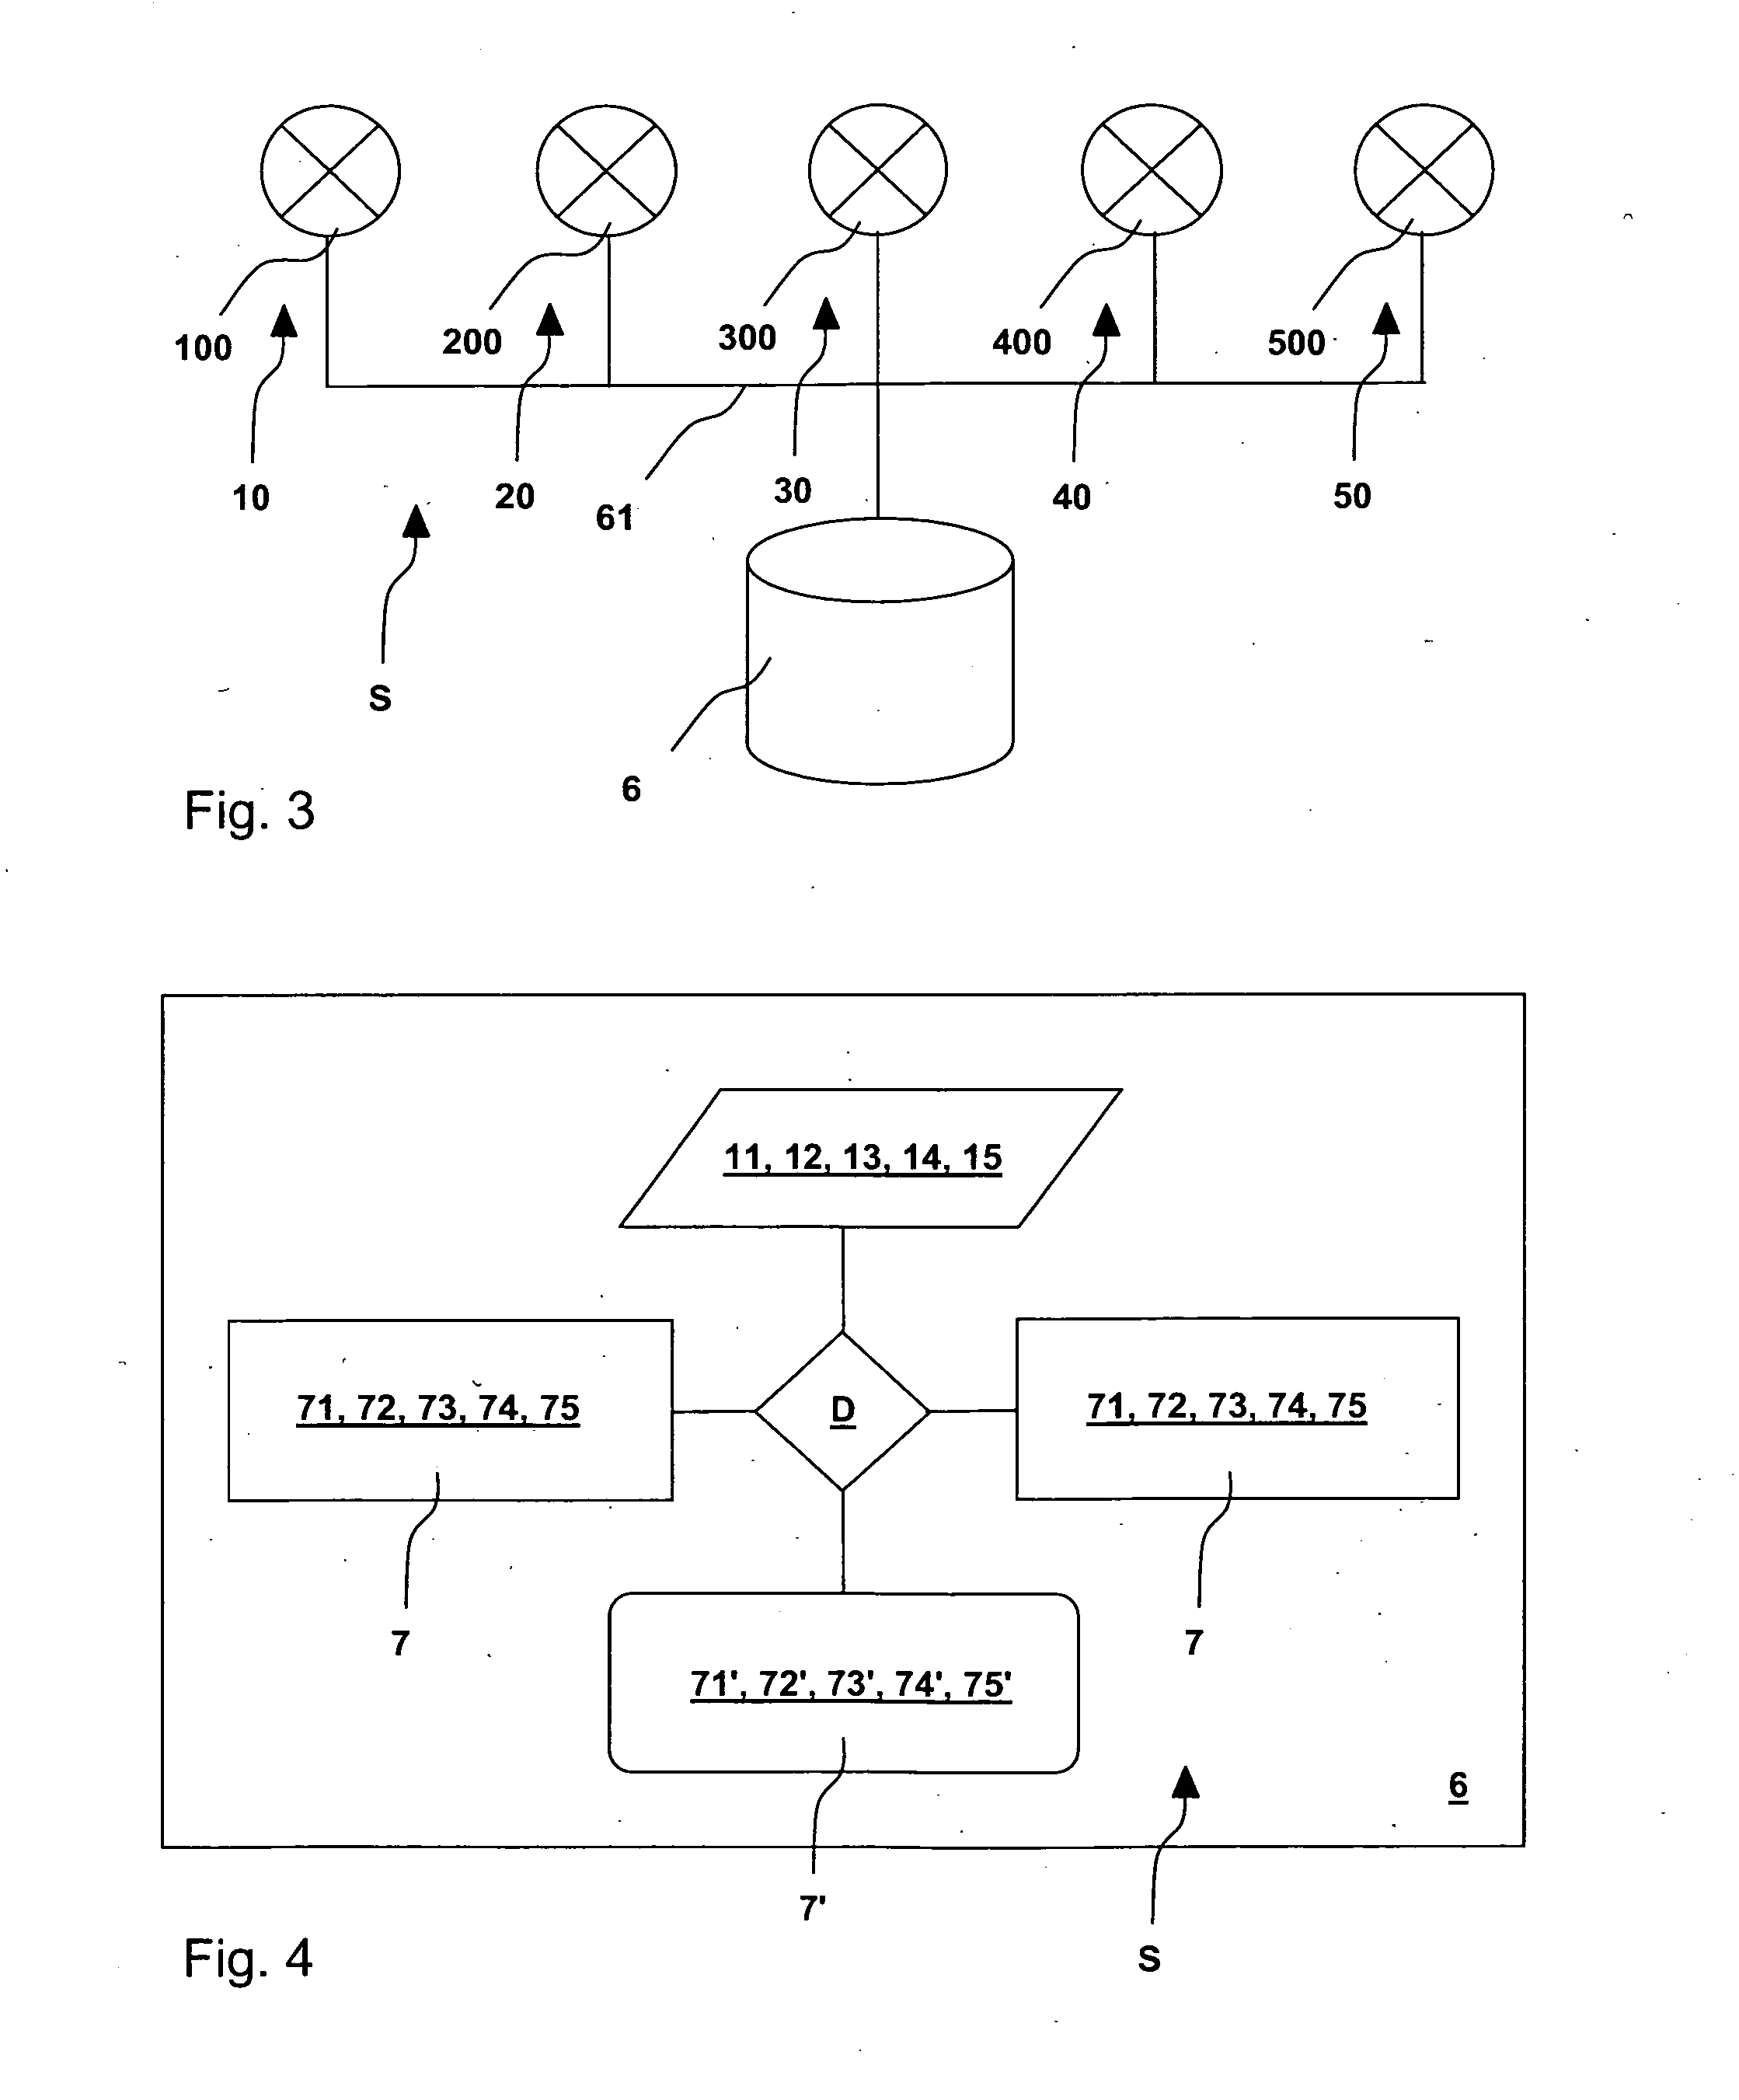 Method of real-time scheduling of processes at distributed manufacturing sites